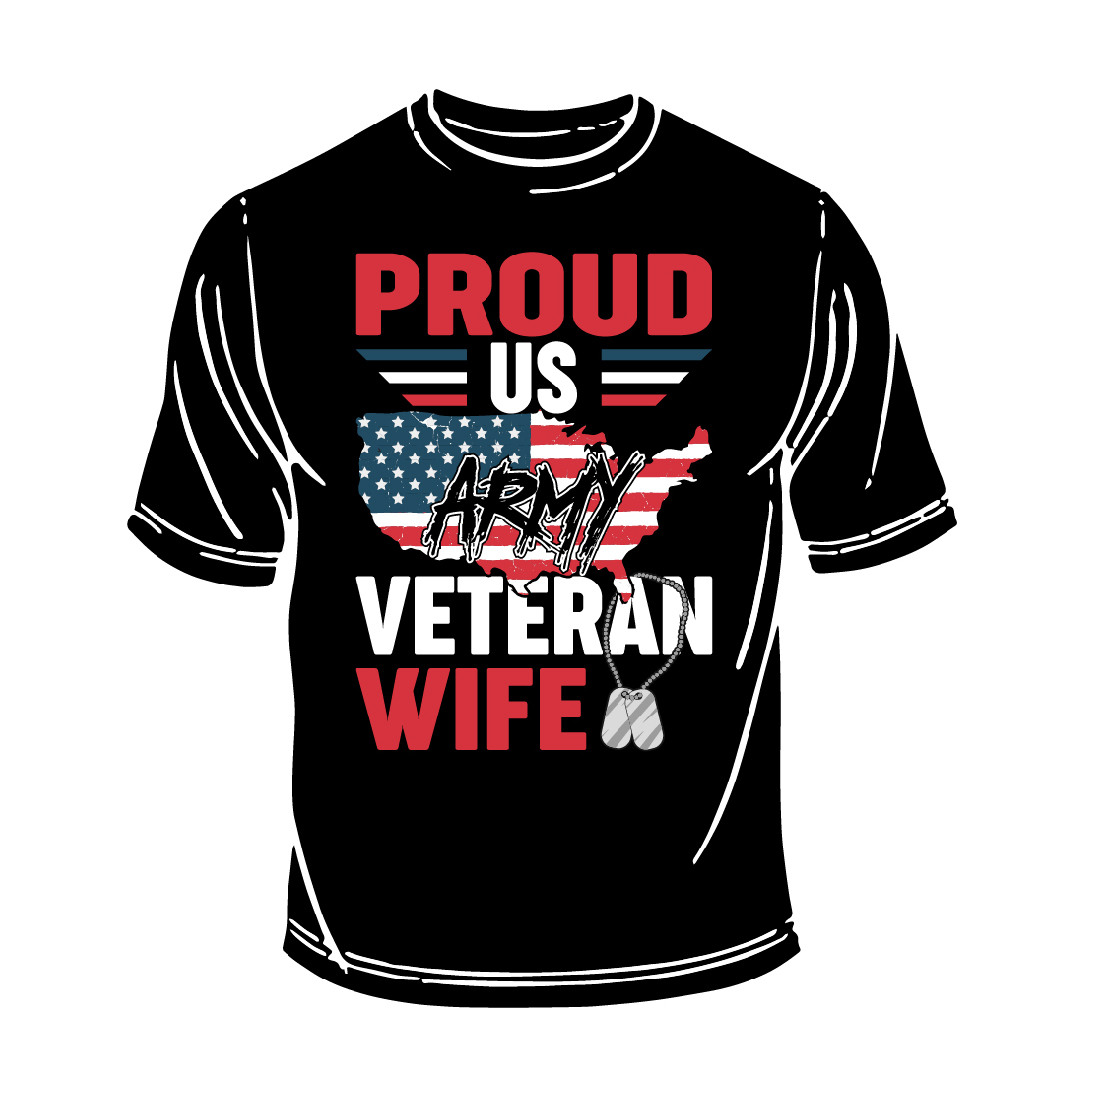 T-shirt Proud US Army Veteran Wife Design cover image.